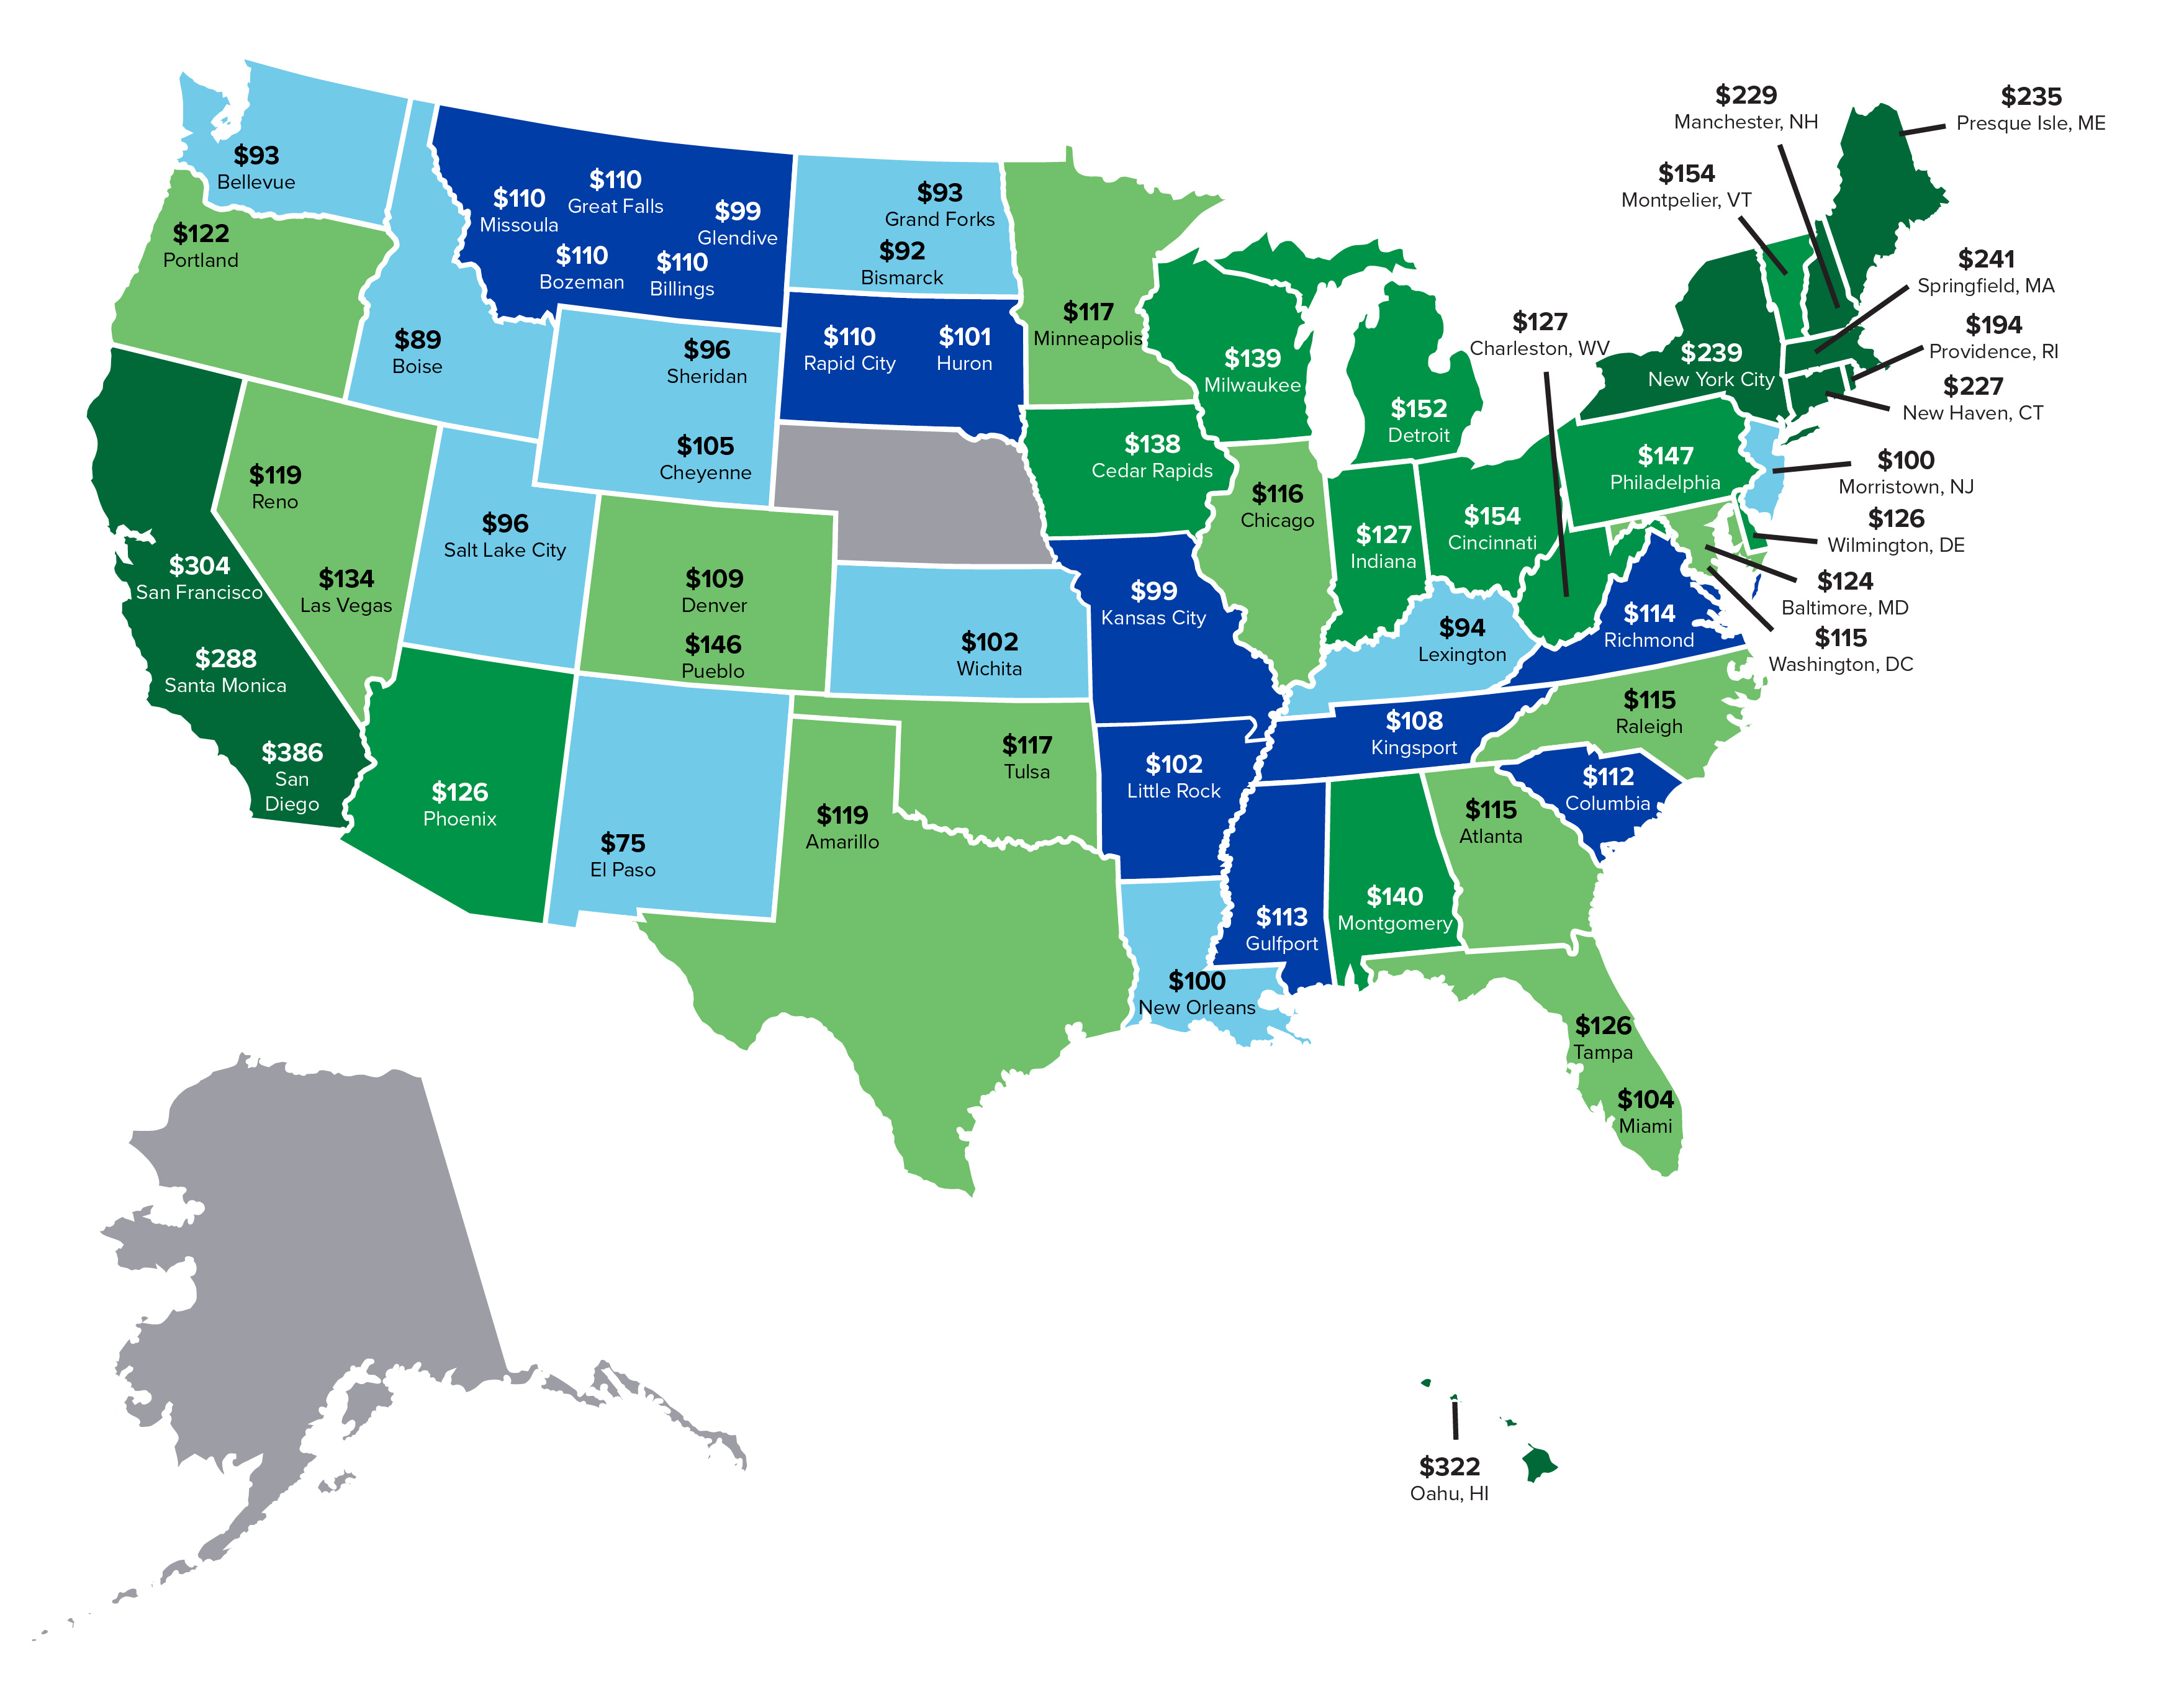 Map showing comparison of electric rates across the country.